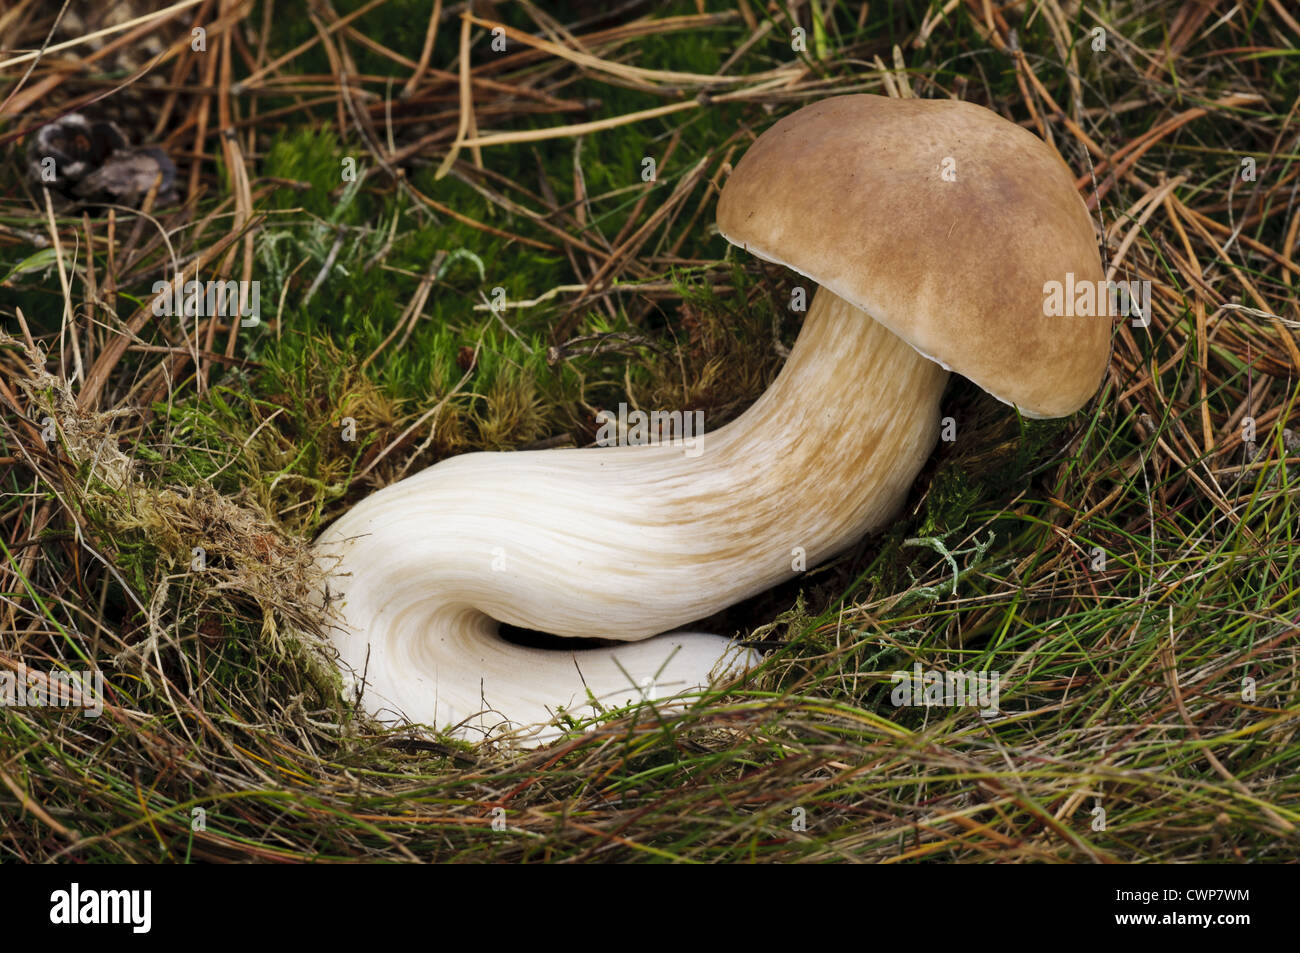 Cep (Boletus edulis) fruiting body with long curved stipe, growing in grassland, Clumber Park, Nottinghamshire, England, october Stock Photo